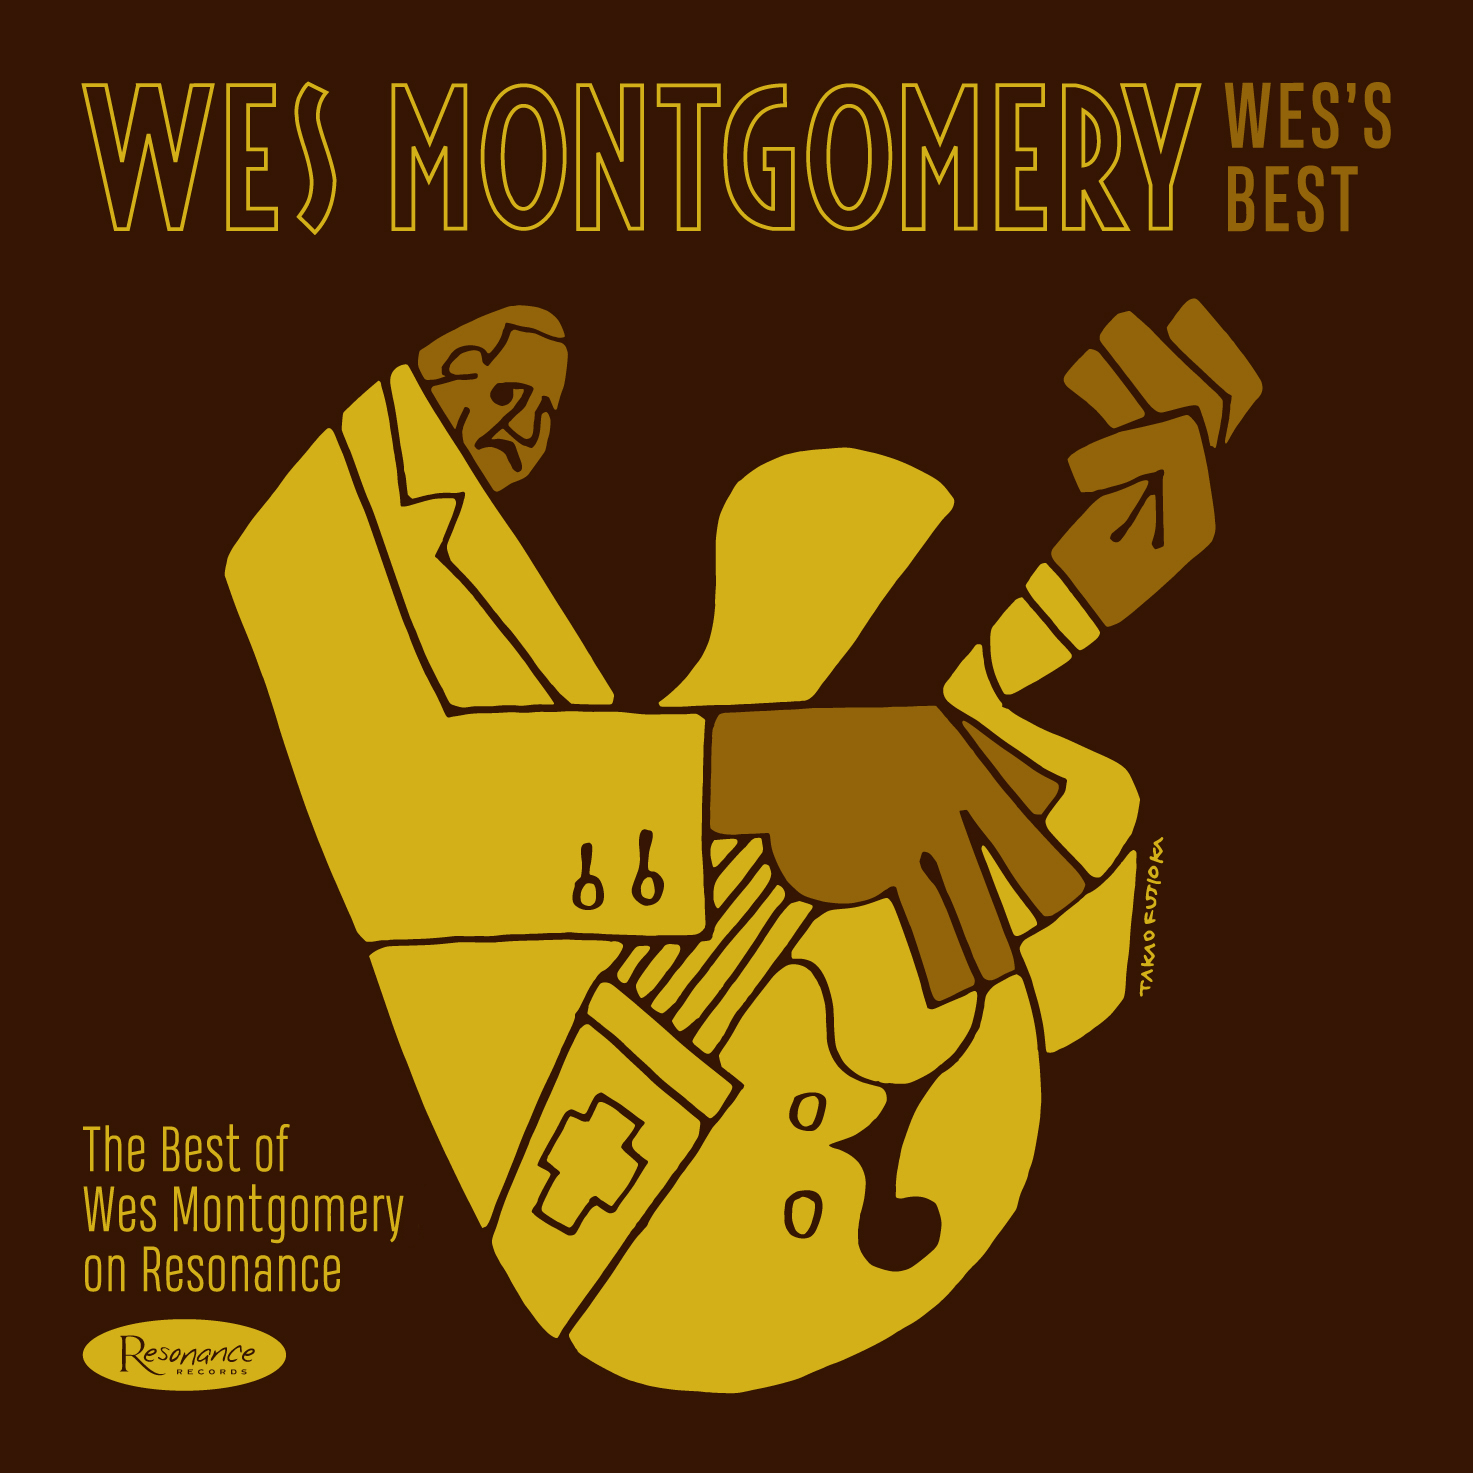 Wes’s Best: The Best of Wes Montgomery on Resonance